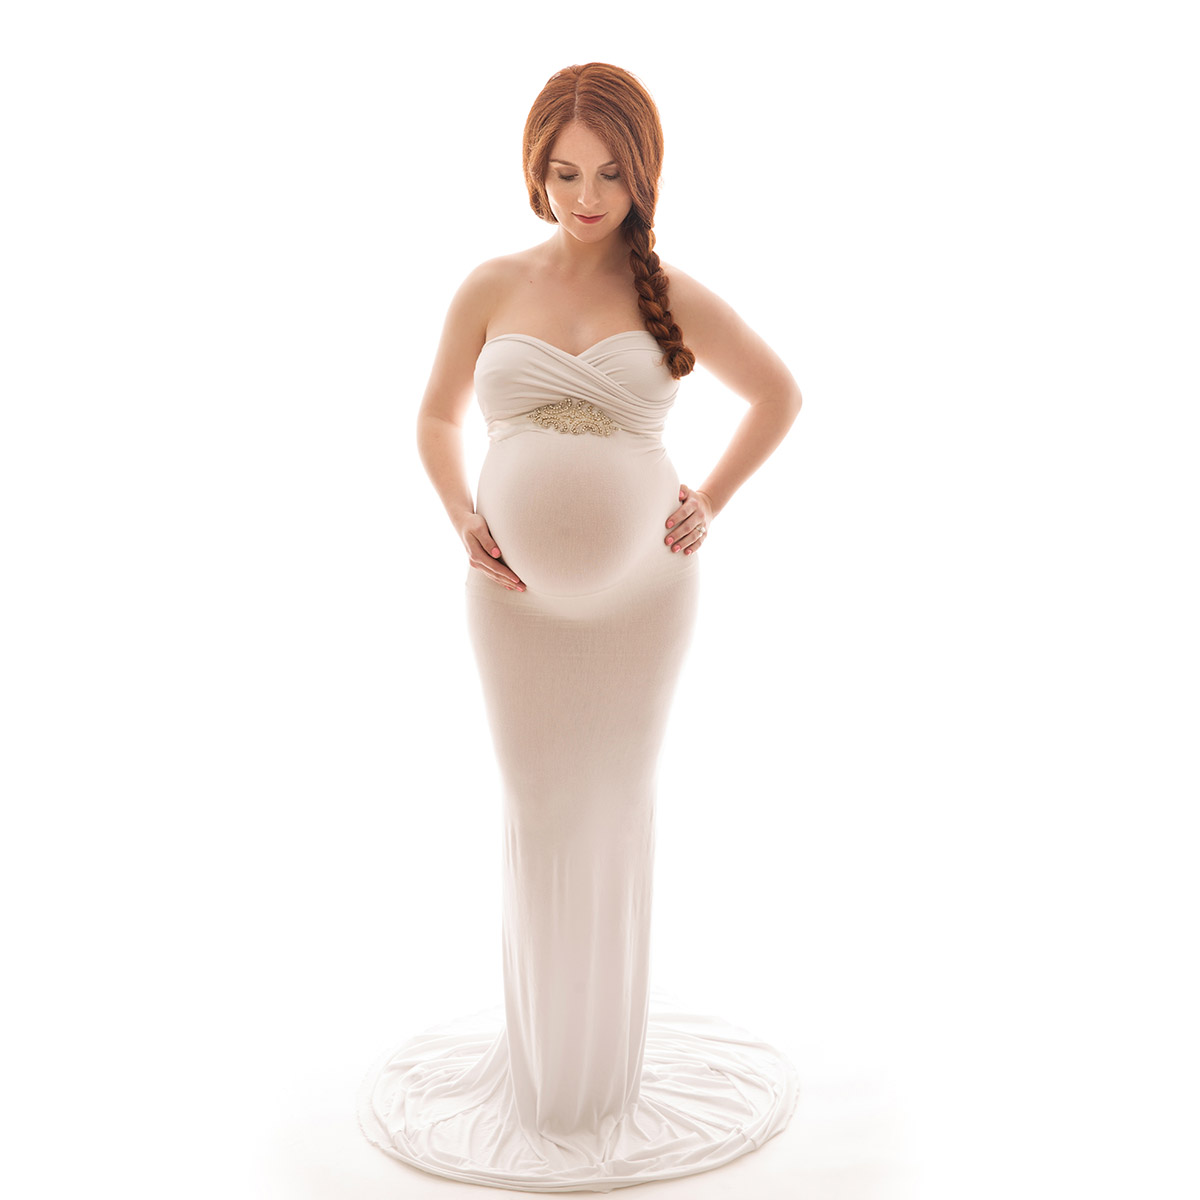 Professional maternity portrait of a woman with red hair and a white dress